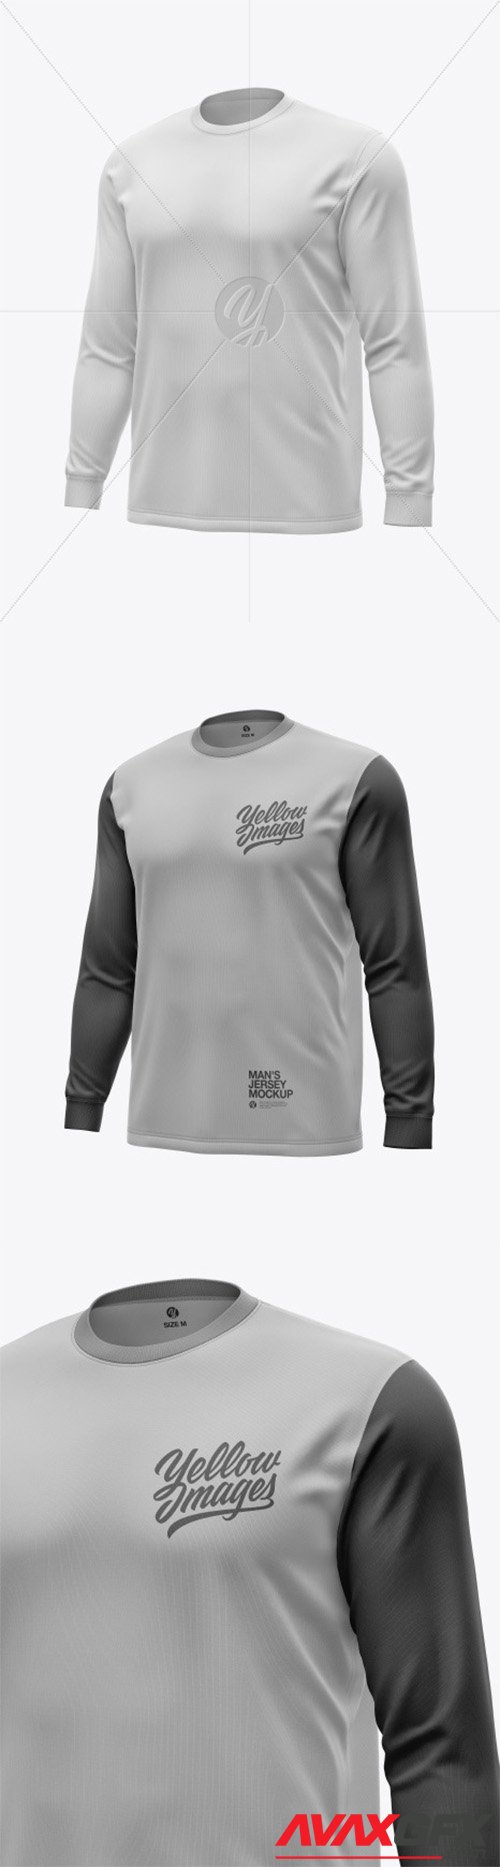 Men's Jersey With Long Sleeve Mockup 61762